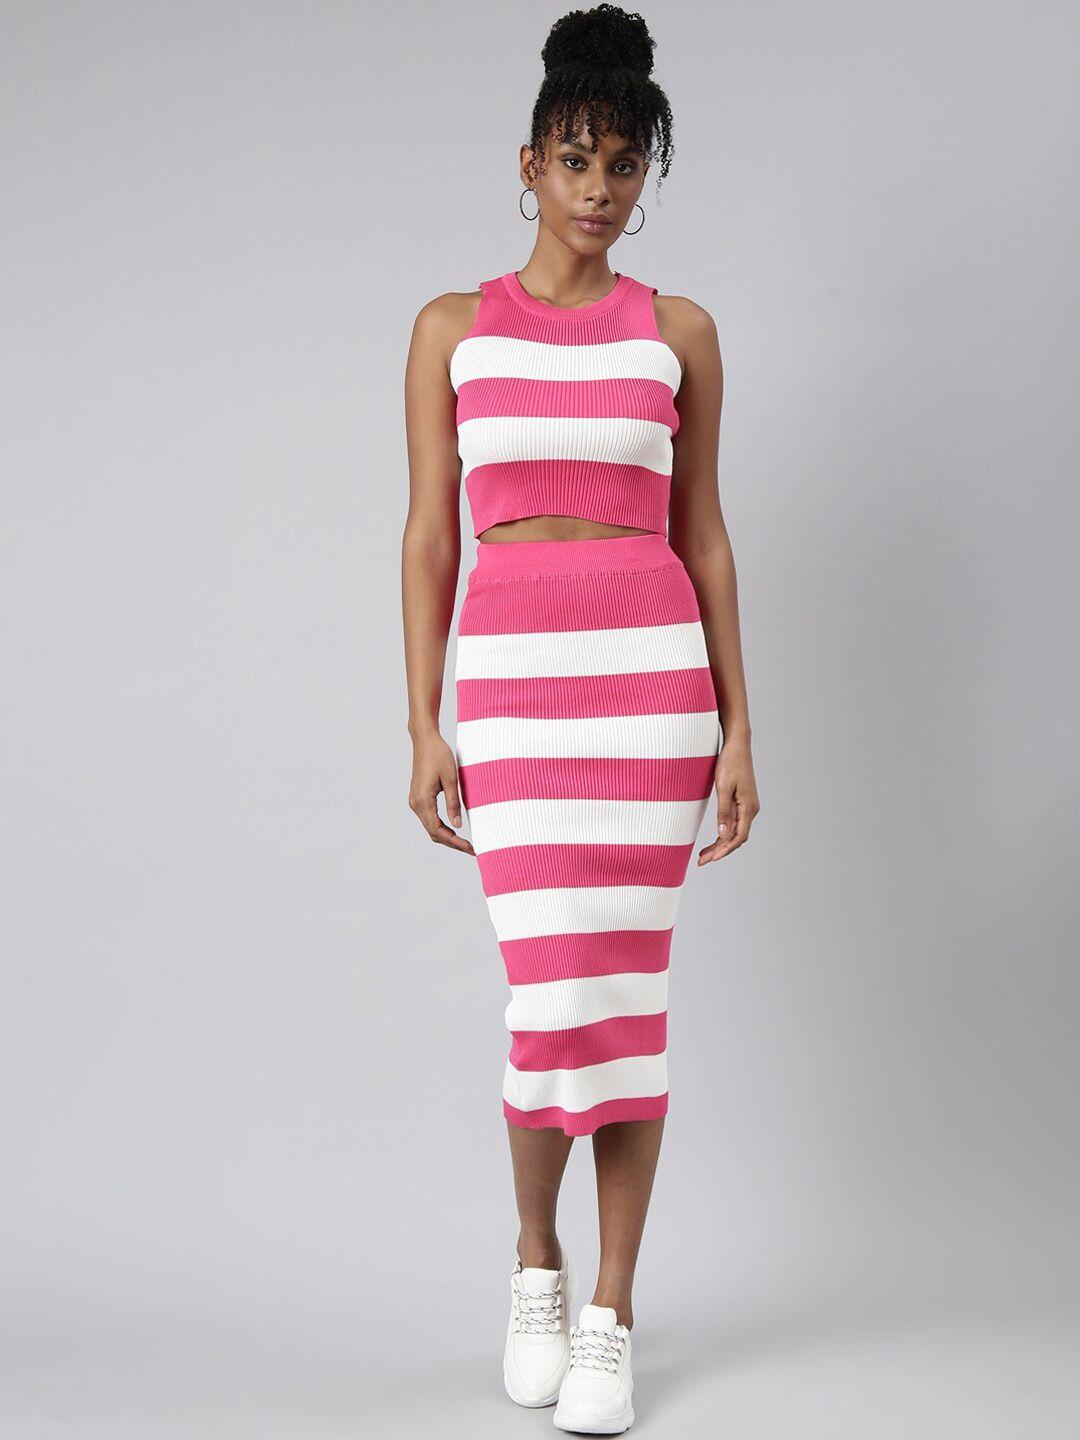 showoff striped acrylic crop top with skirt co-ords